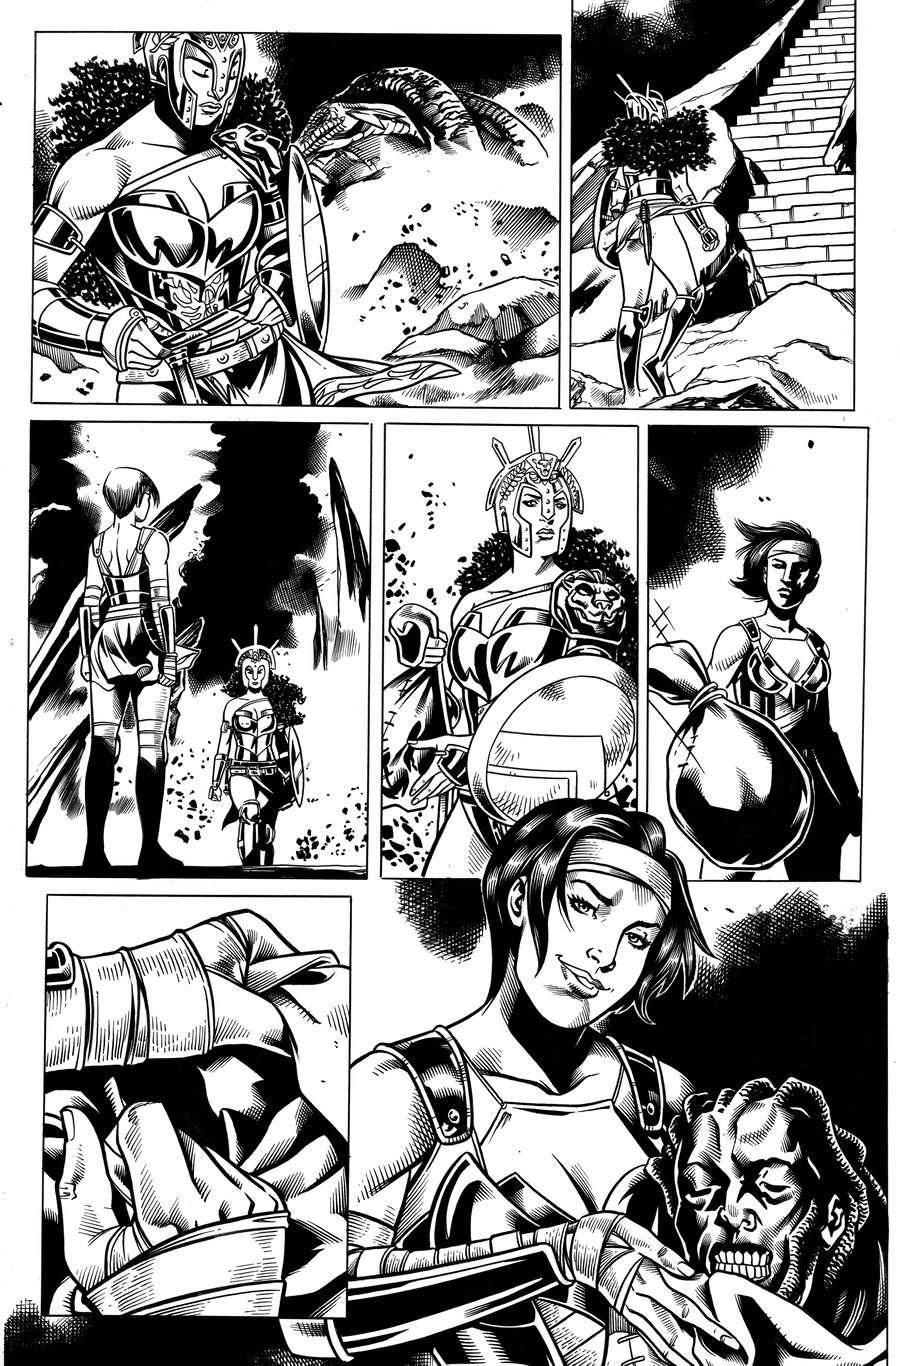 Image of Nubia and the Amazons #4 PG 22